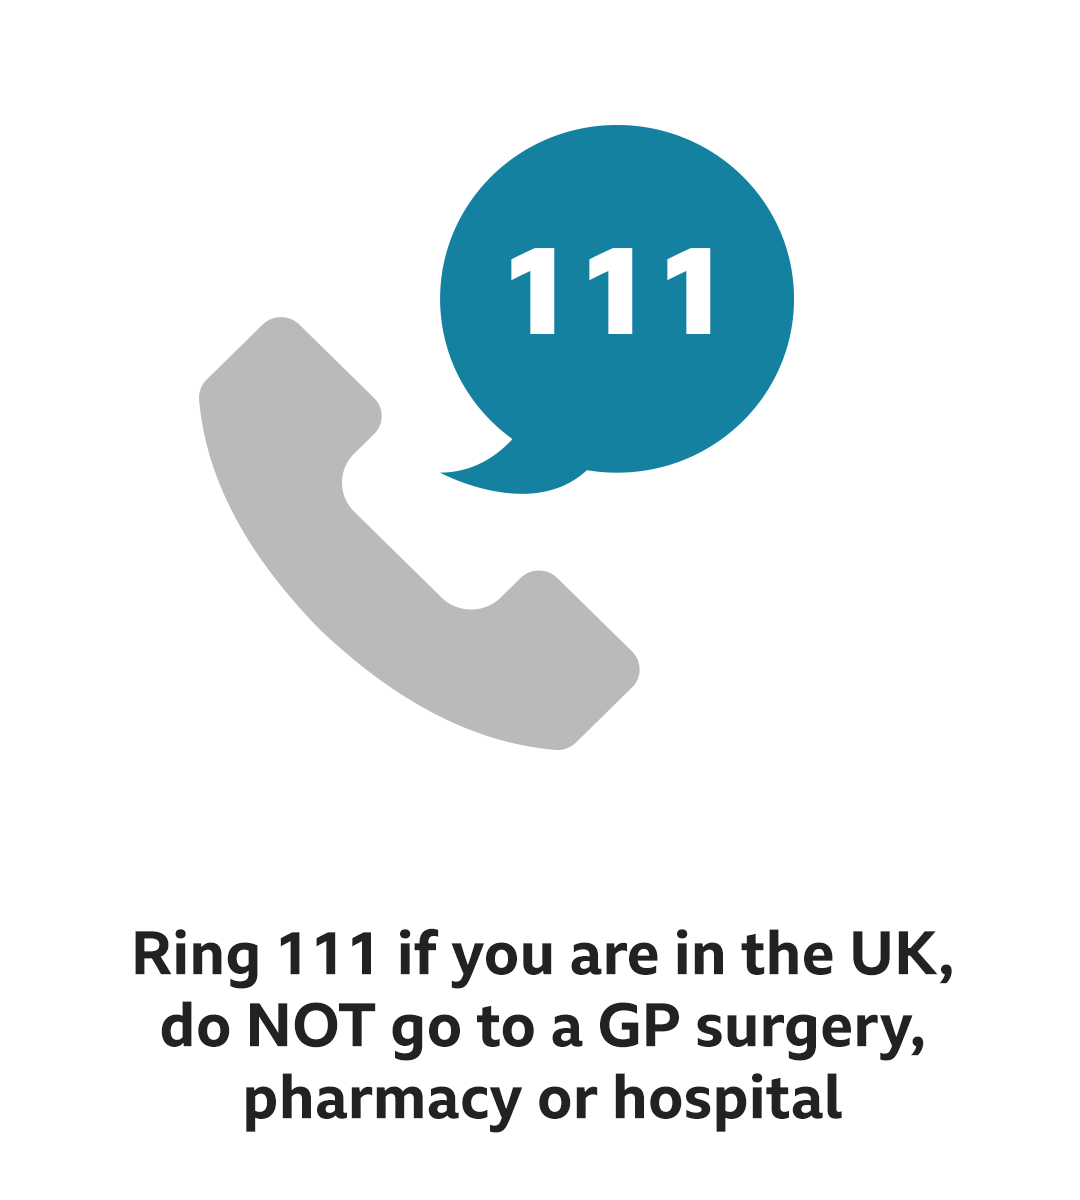 Text reads: Ring 111 if you are in the UK, do NOT go to a GP surgery, pharmarcy or hospital